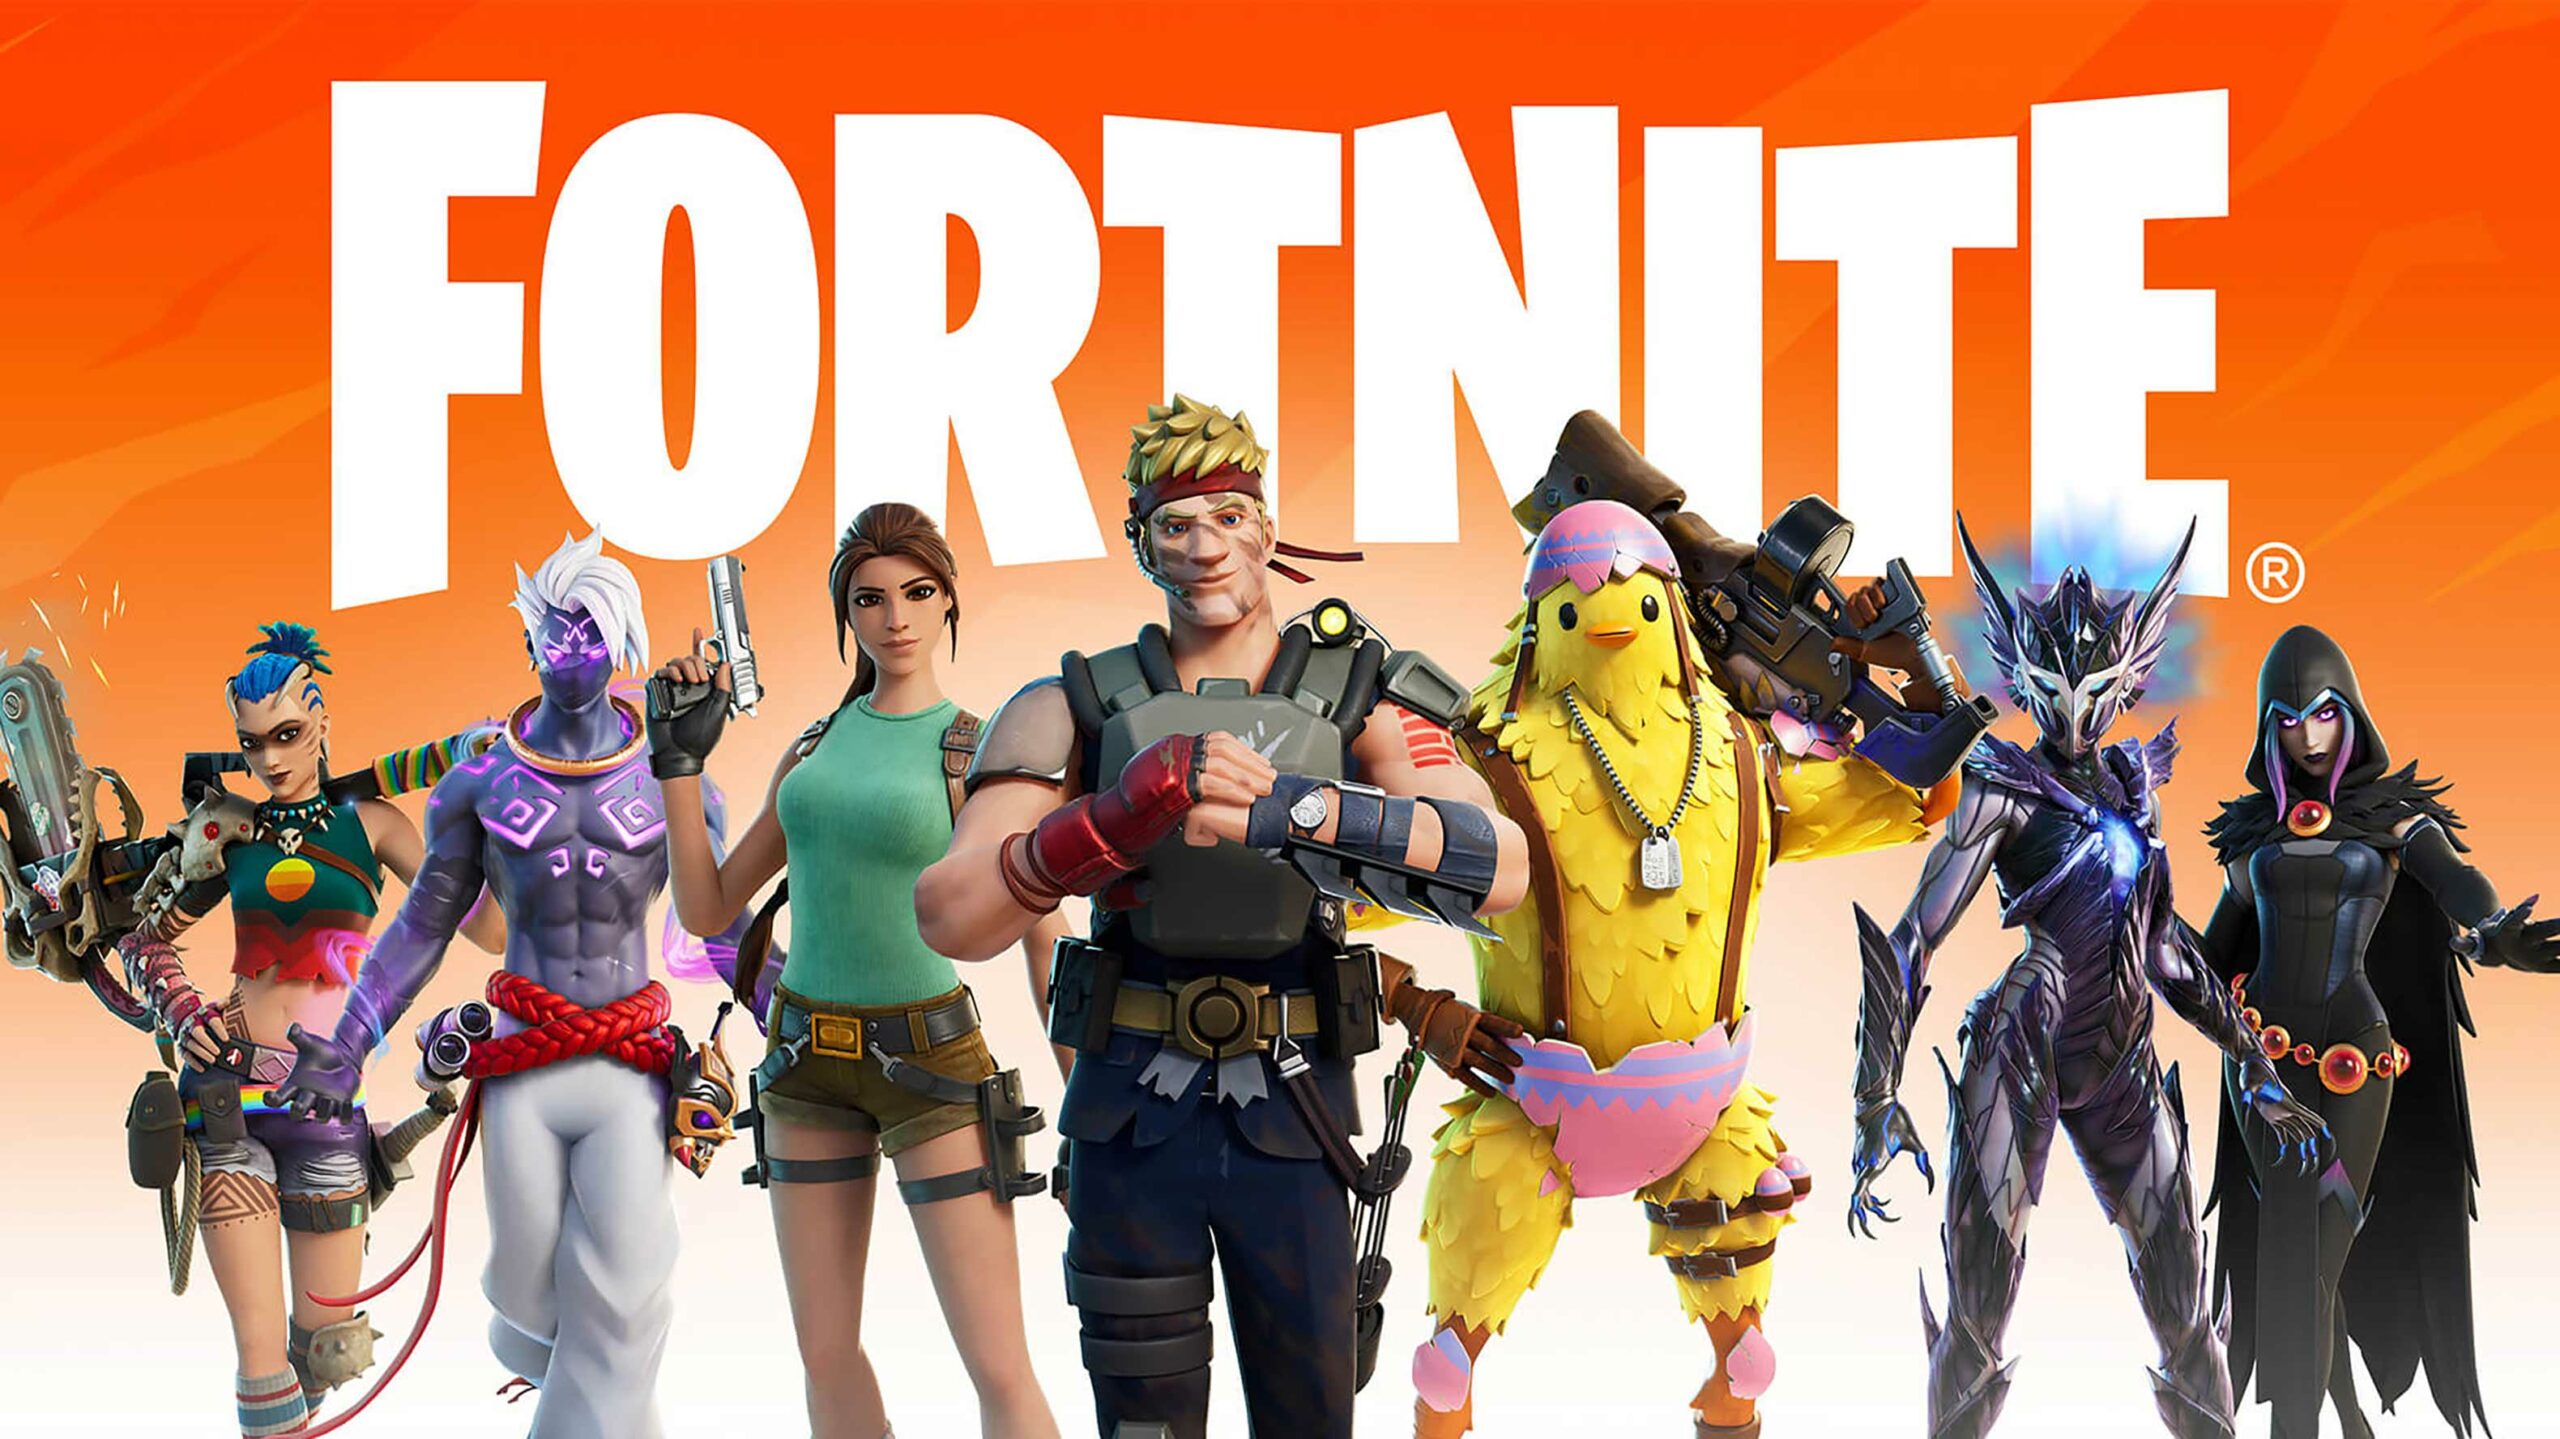 You can't play Fortnite on Microsoft's xCloud because Epic wouldn't allow it